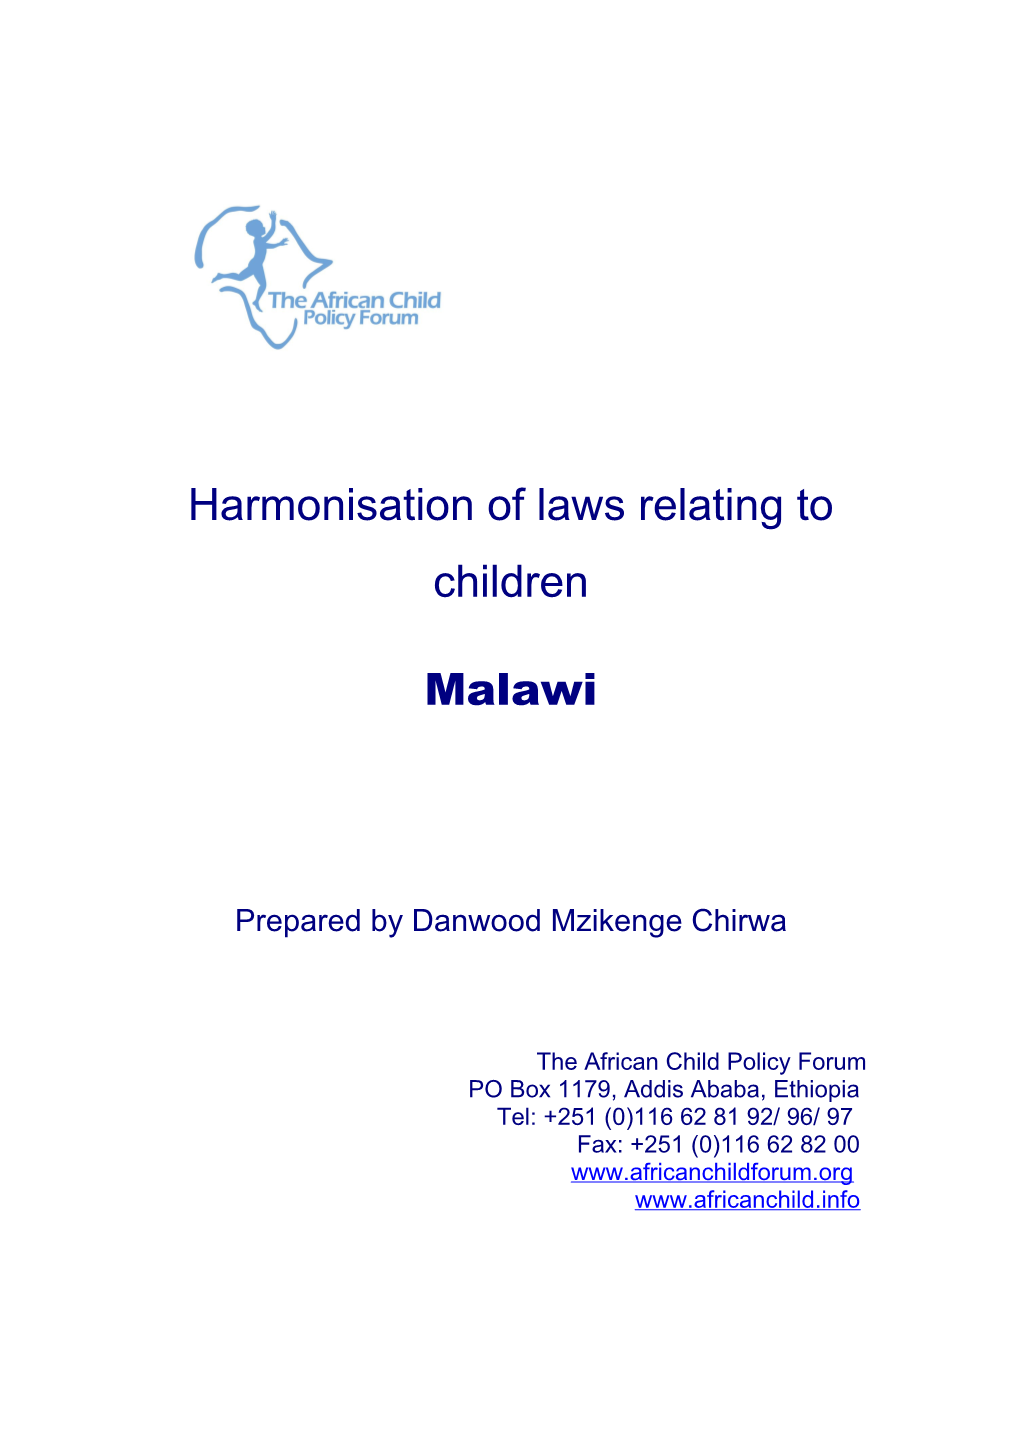 The Domestication of the Convention on the Rights of the Child in Malawi